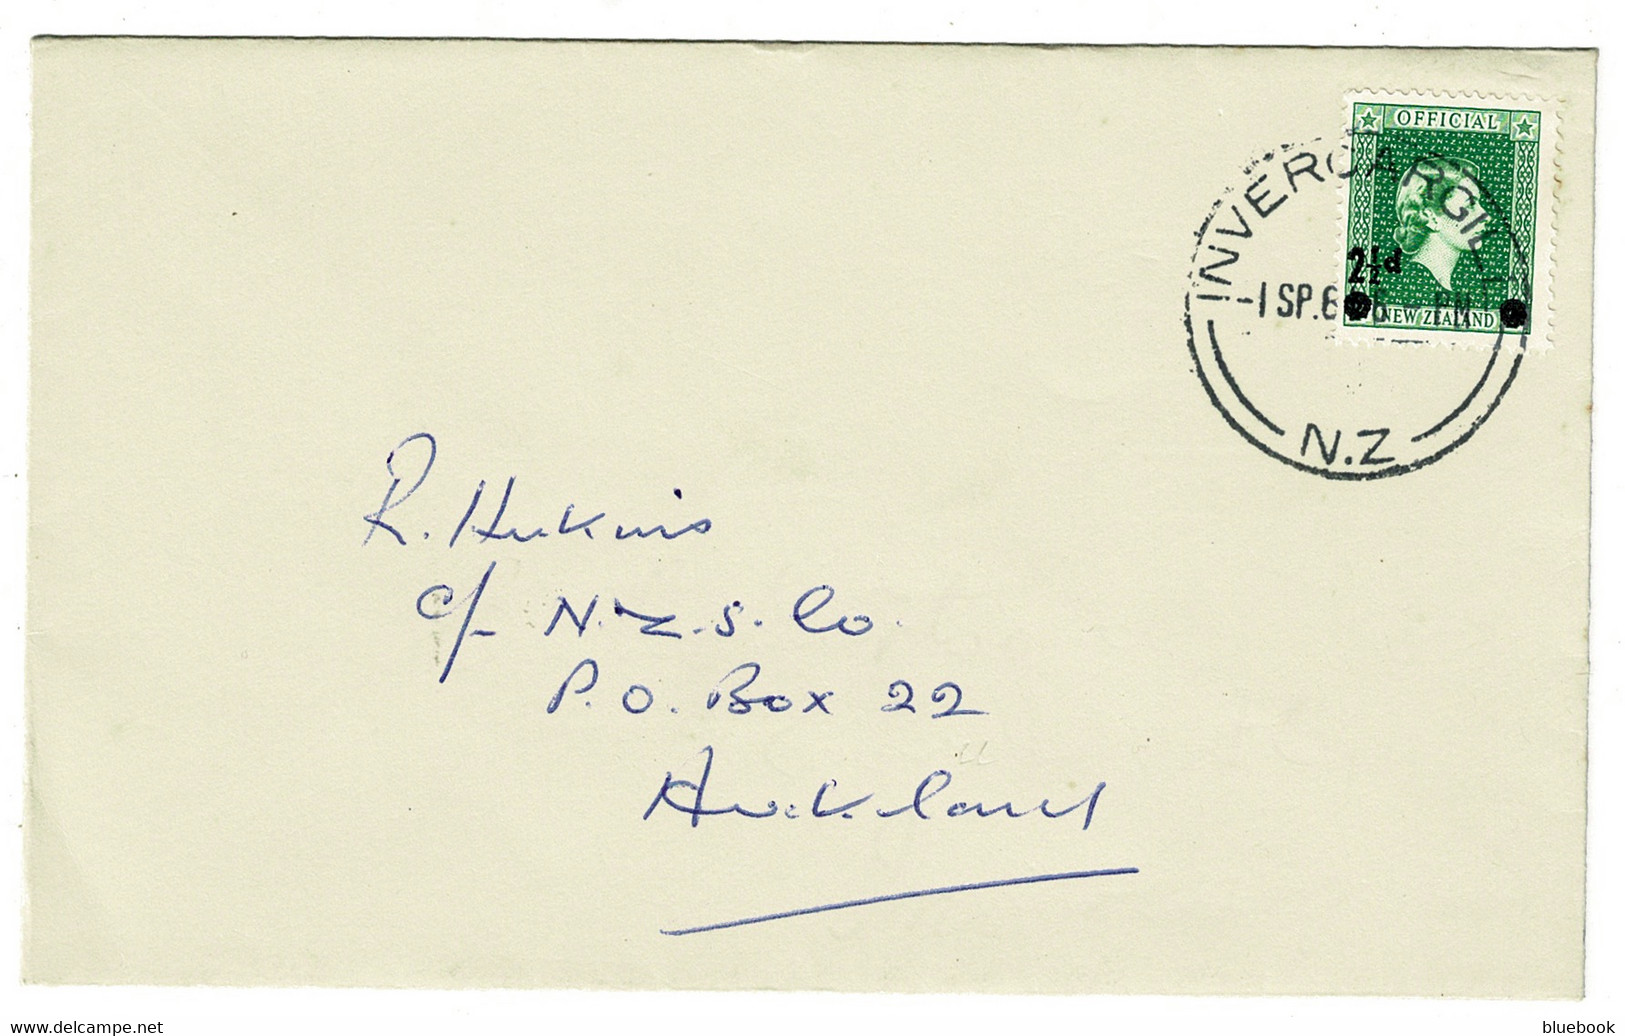 Ref 1553 -  1961 New Zealand FDC First Day Cover - 2 1/2d Official Opt - Invercargill Cancel - Private Use Of Official - Covers & Documents